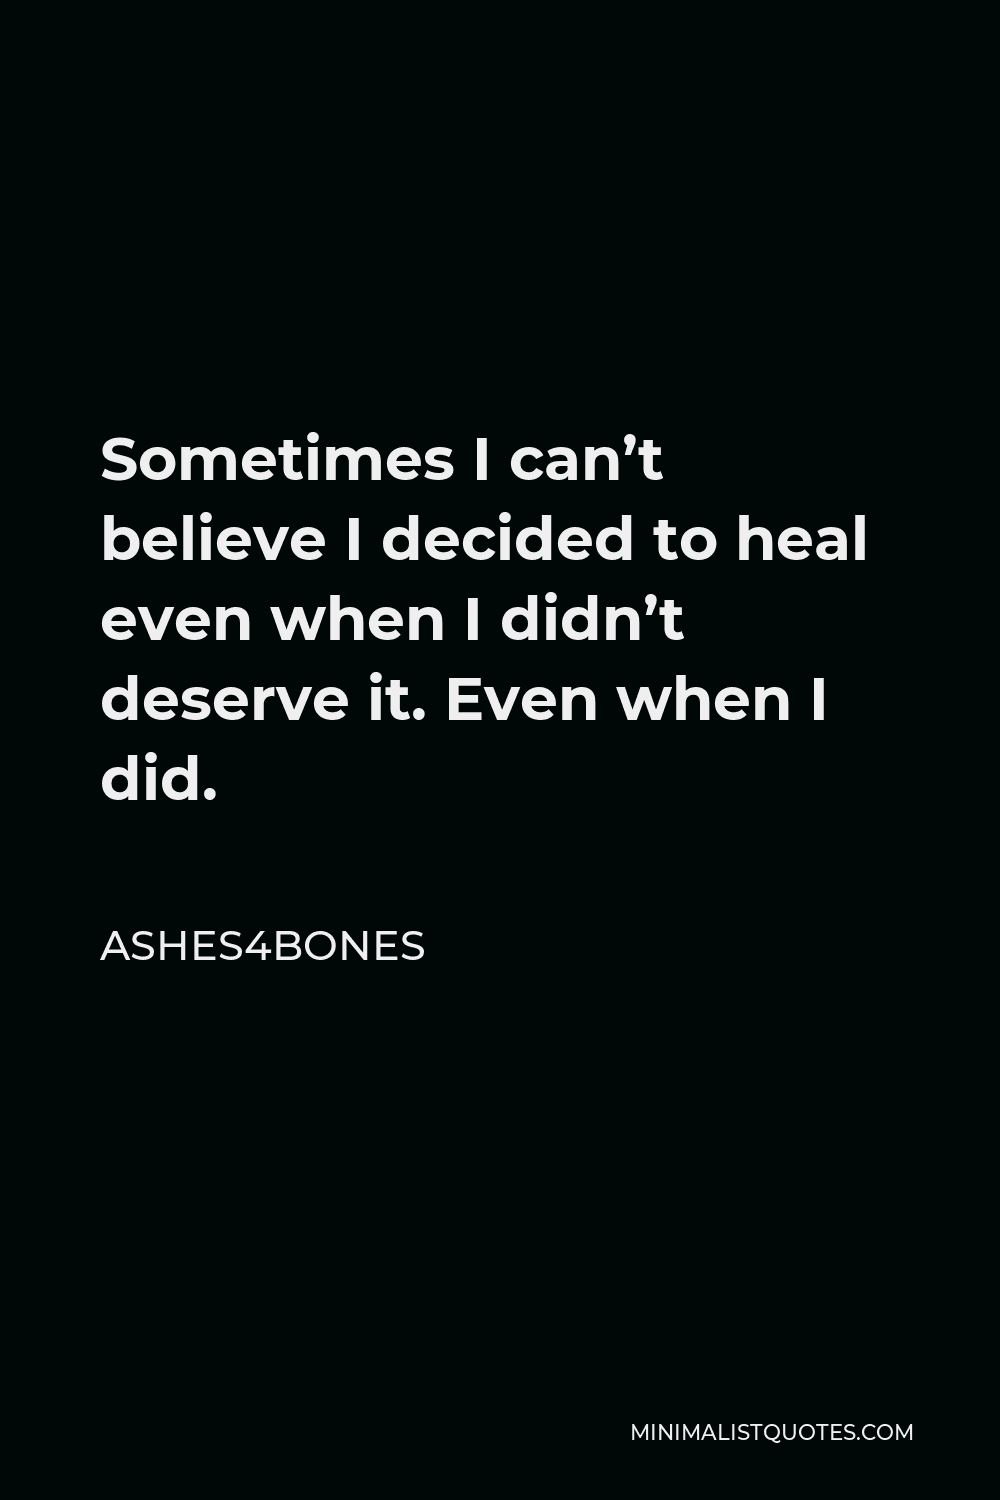 Ashes4bones Quote - Sometimes I can’t believe I decided to heal even when I didn’t deserve it. Even when I did.